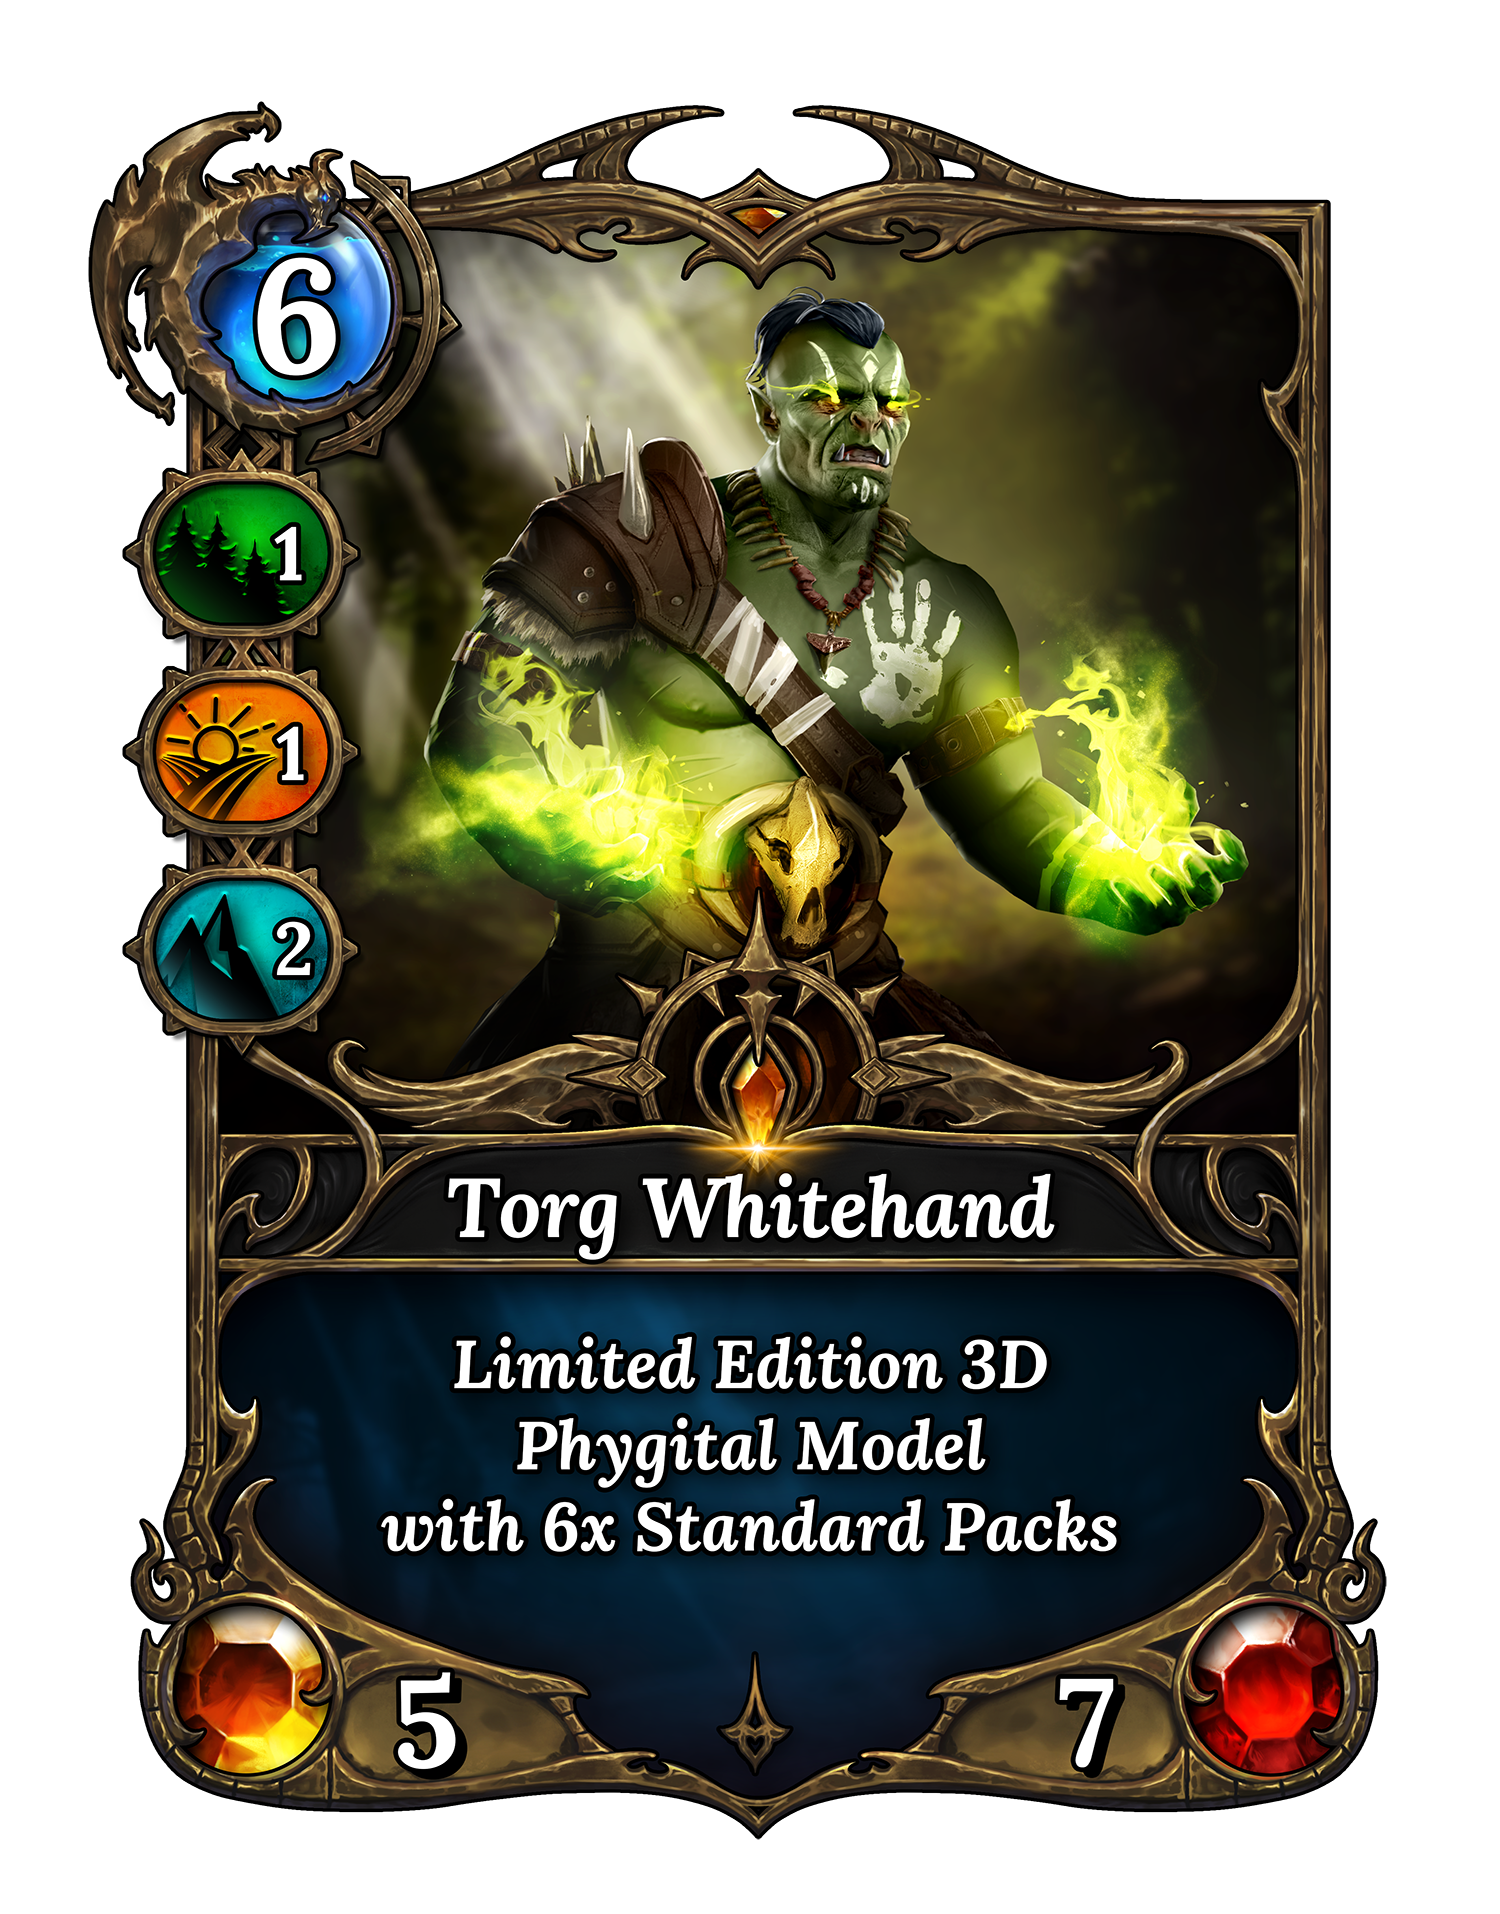 Torg Whitehand - limited genesis collection card 